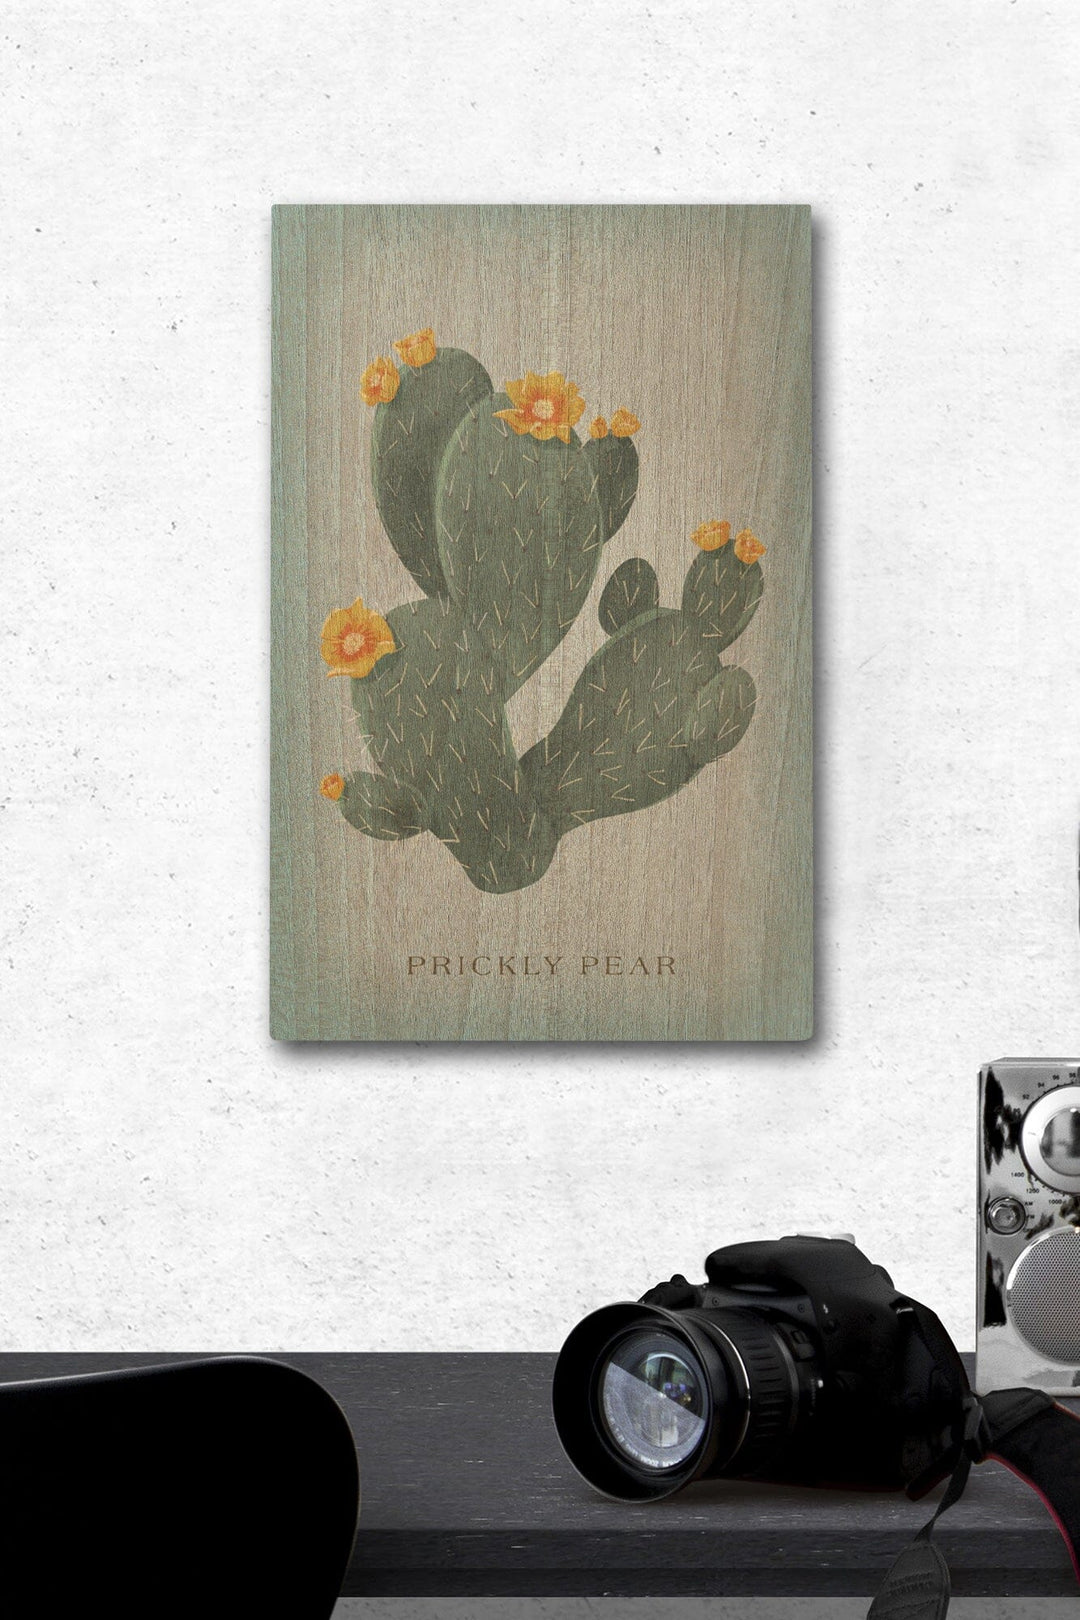 Prickly Pear with Yellow Flowers, Vintage Flora, Lantern Press Artwork, Wood Signs and Postcards Wood Lantern Press 12 x 18 Wood Gallery Print 